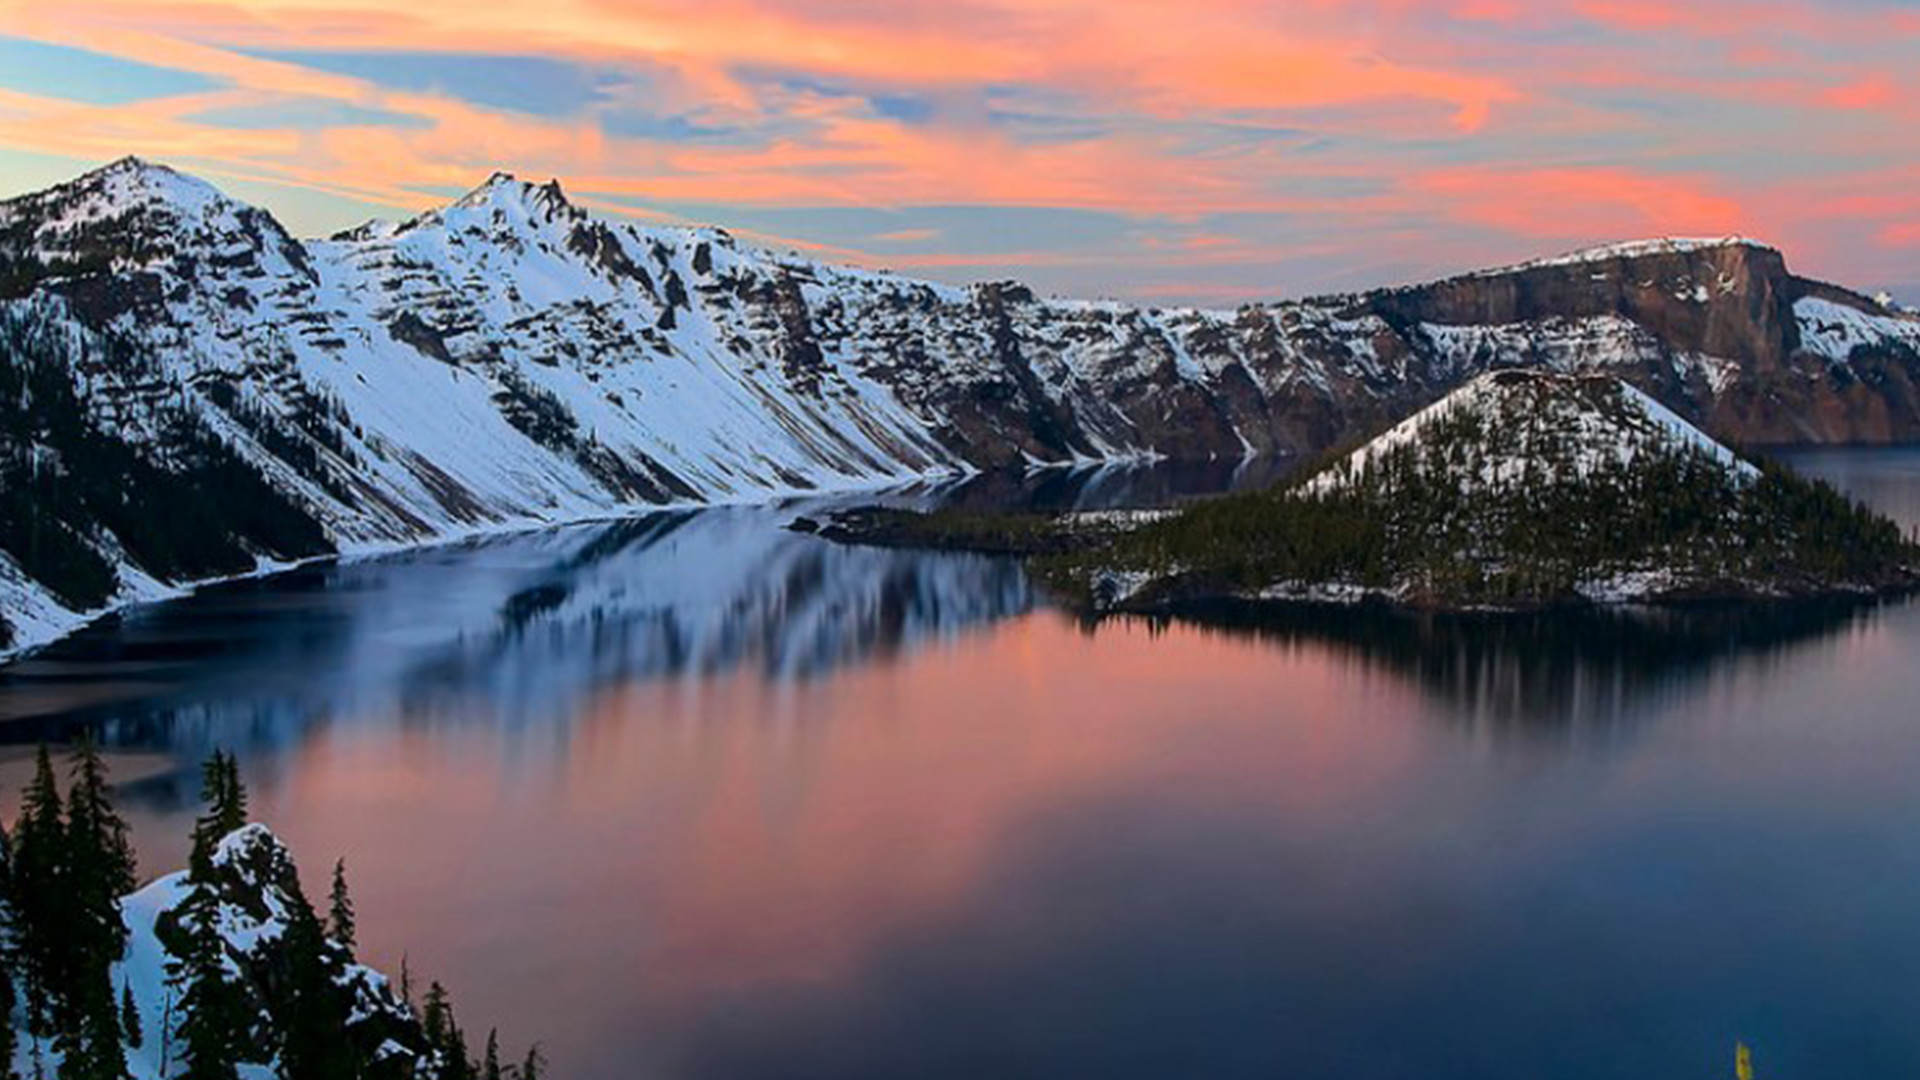 1920x1080 Sunset on Crater Lake Crater Lake National Park, Oregon.A winter sunset on Crater  Lake. Thanks for looking and make it a great day!